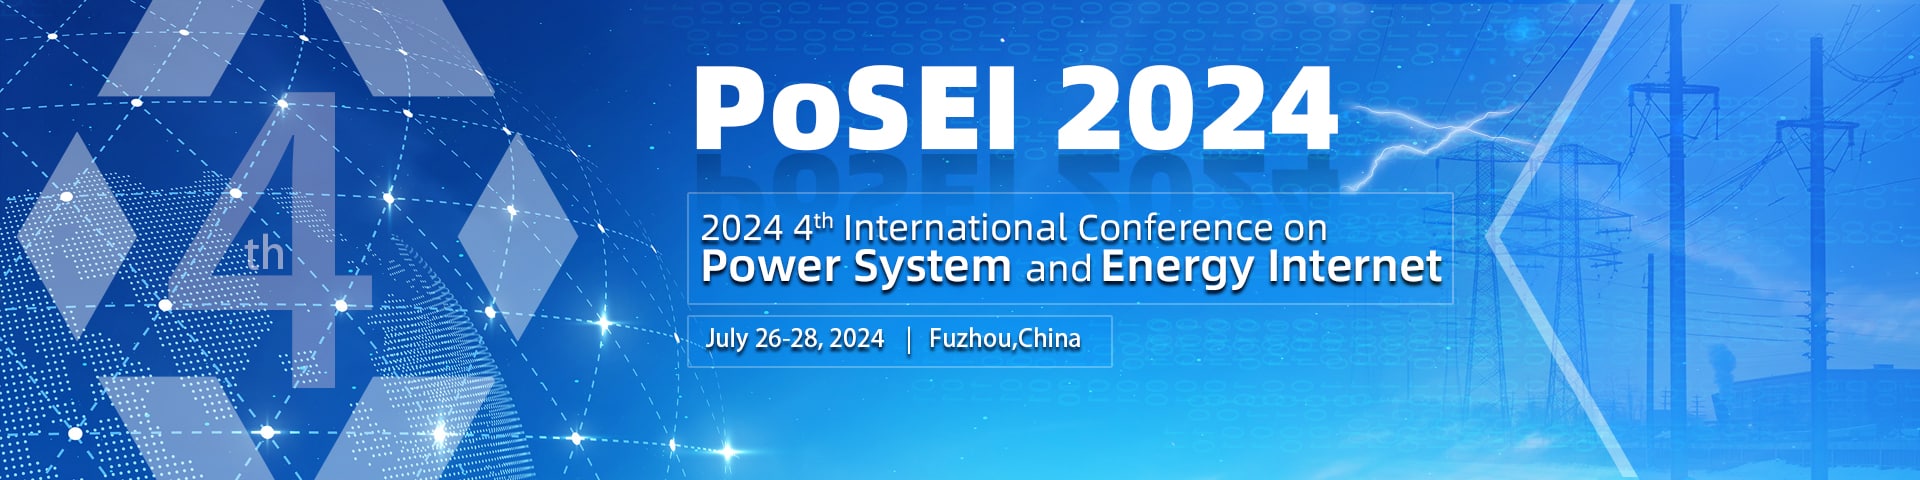 2024 4th International Conference on Power System and Energy Internet (PoSEI 2024)